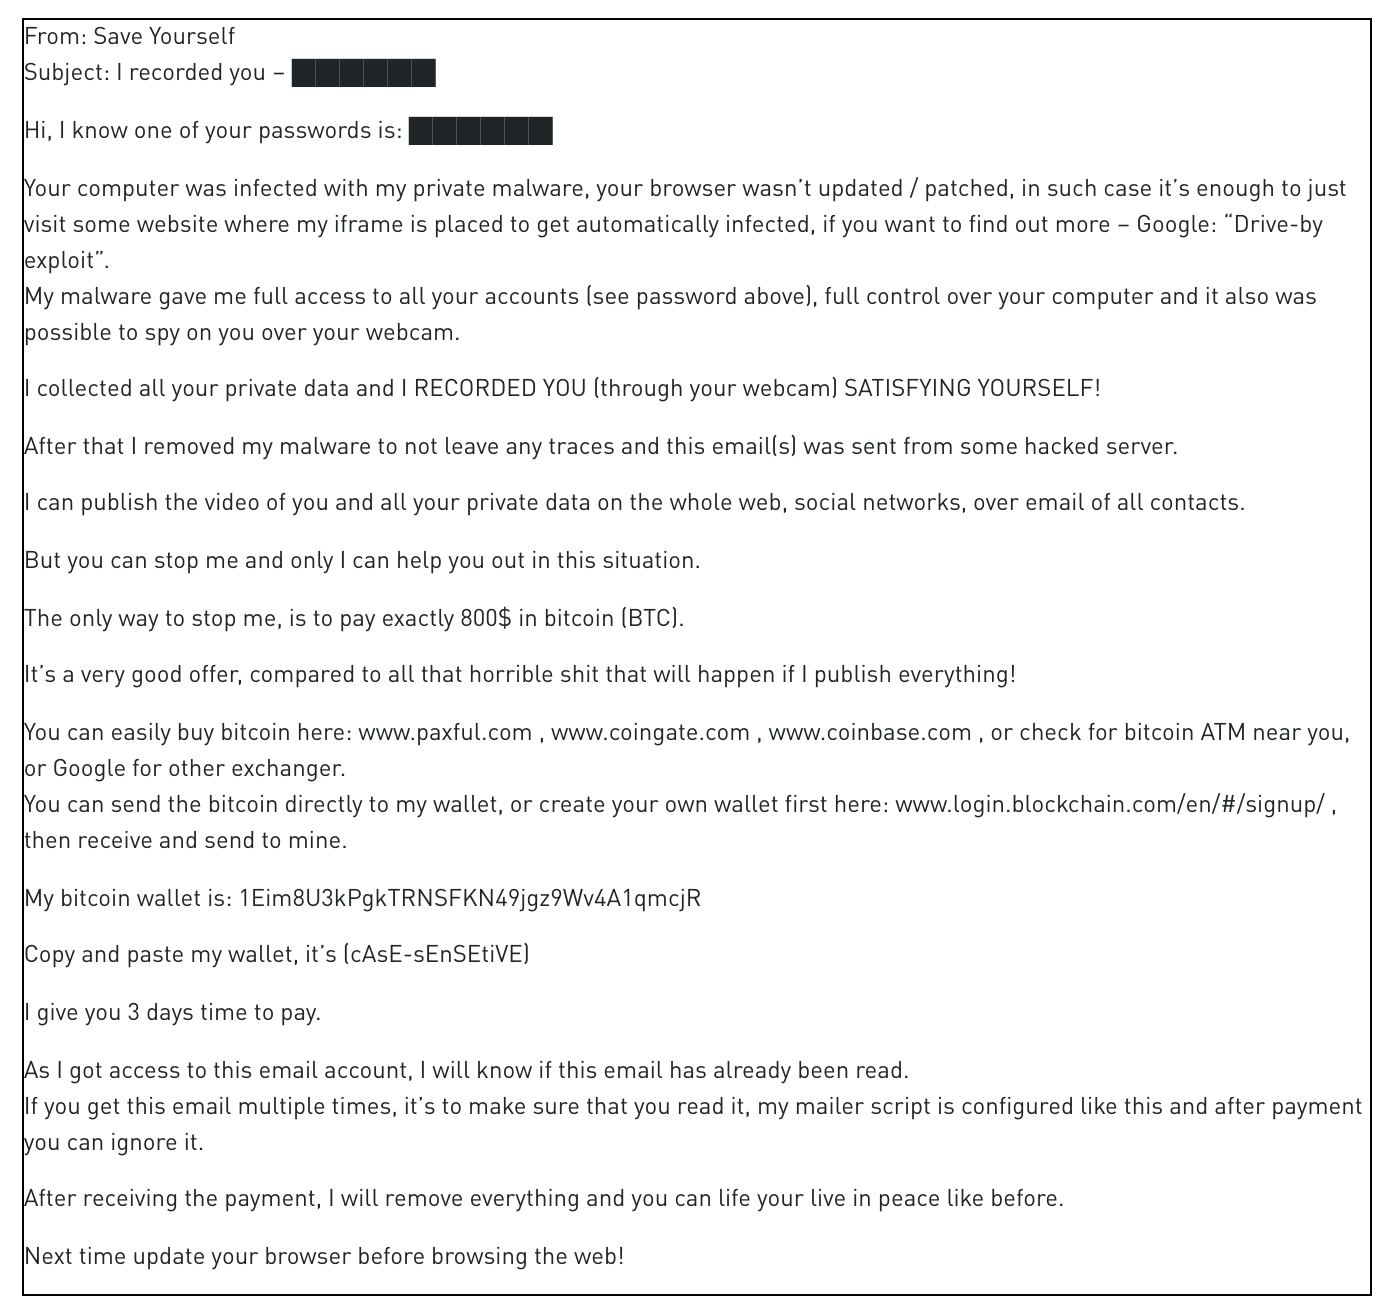 Example of sextortion email sent